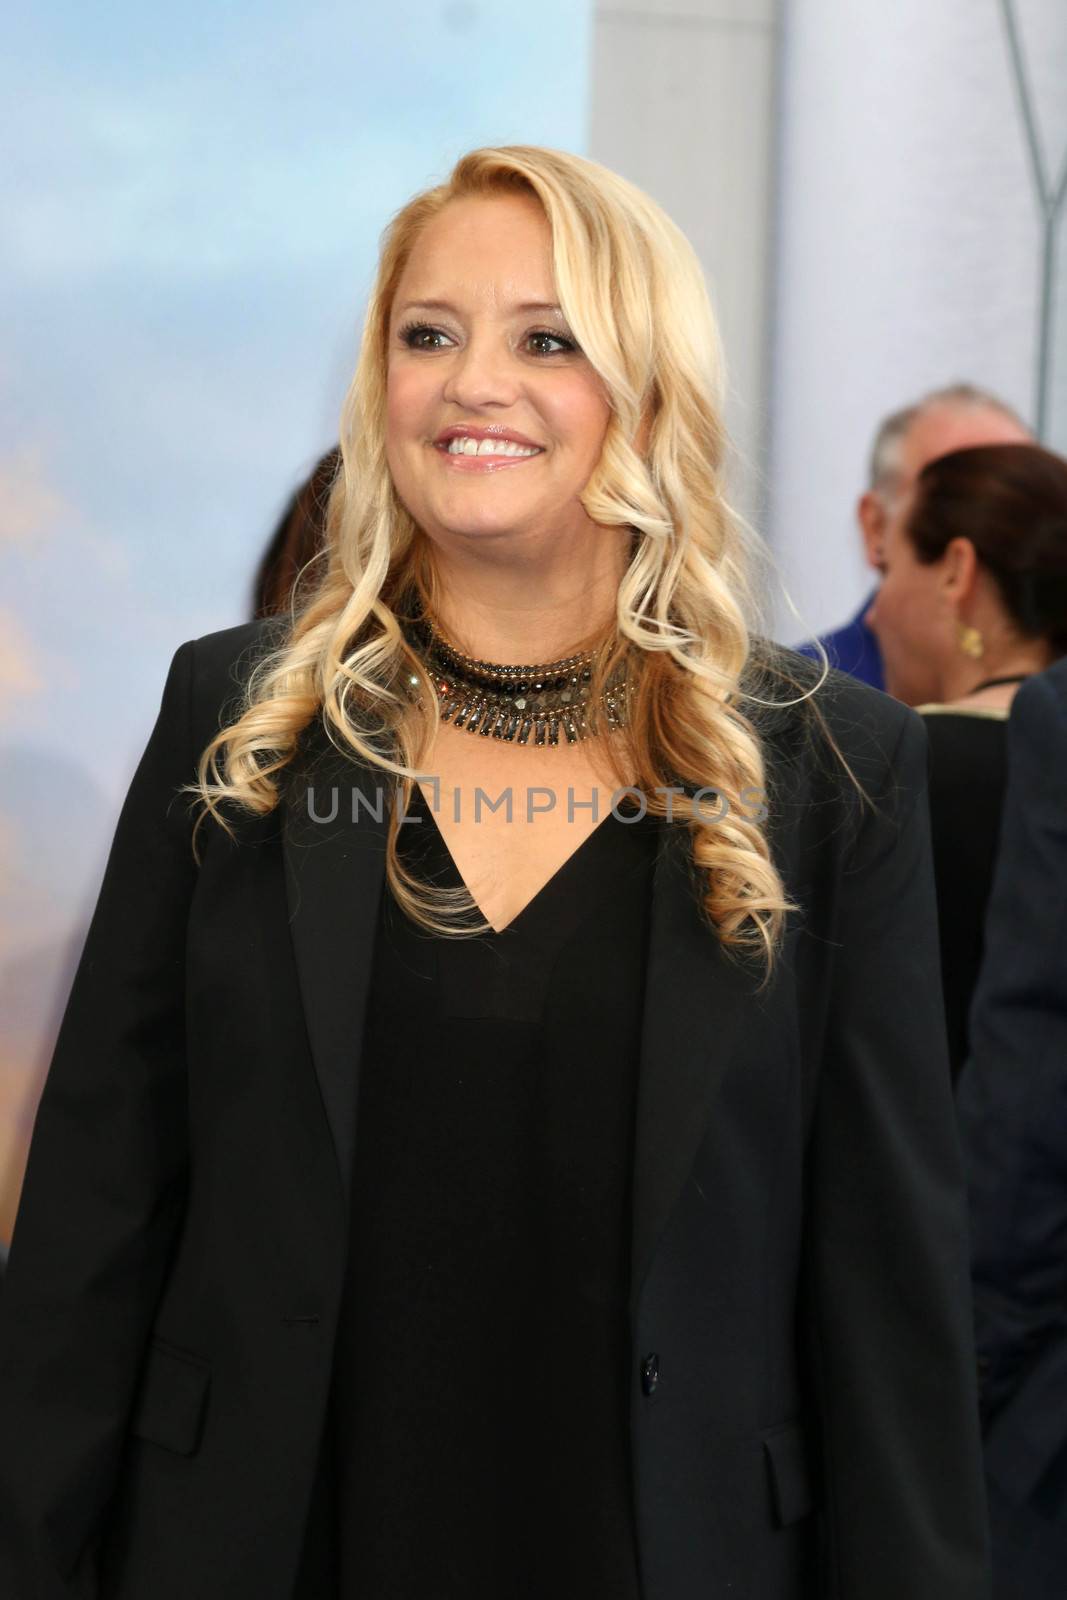 Lucy Walker
at the "Wonder Woman" Premiere, Pantages, Hollywood, CA 05-25-17/ImageCollect by ImageCollect